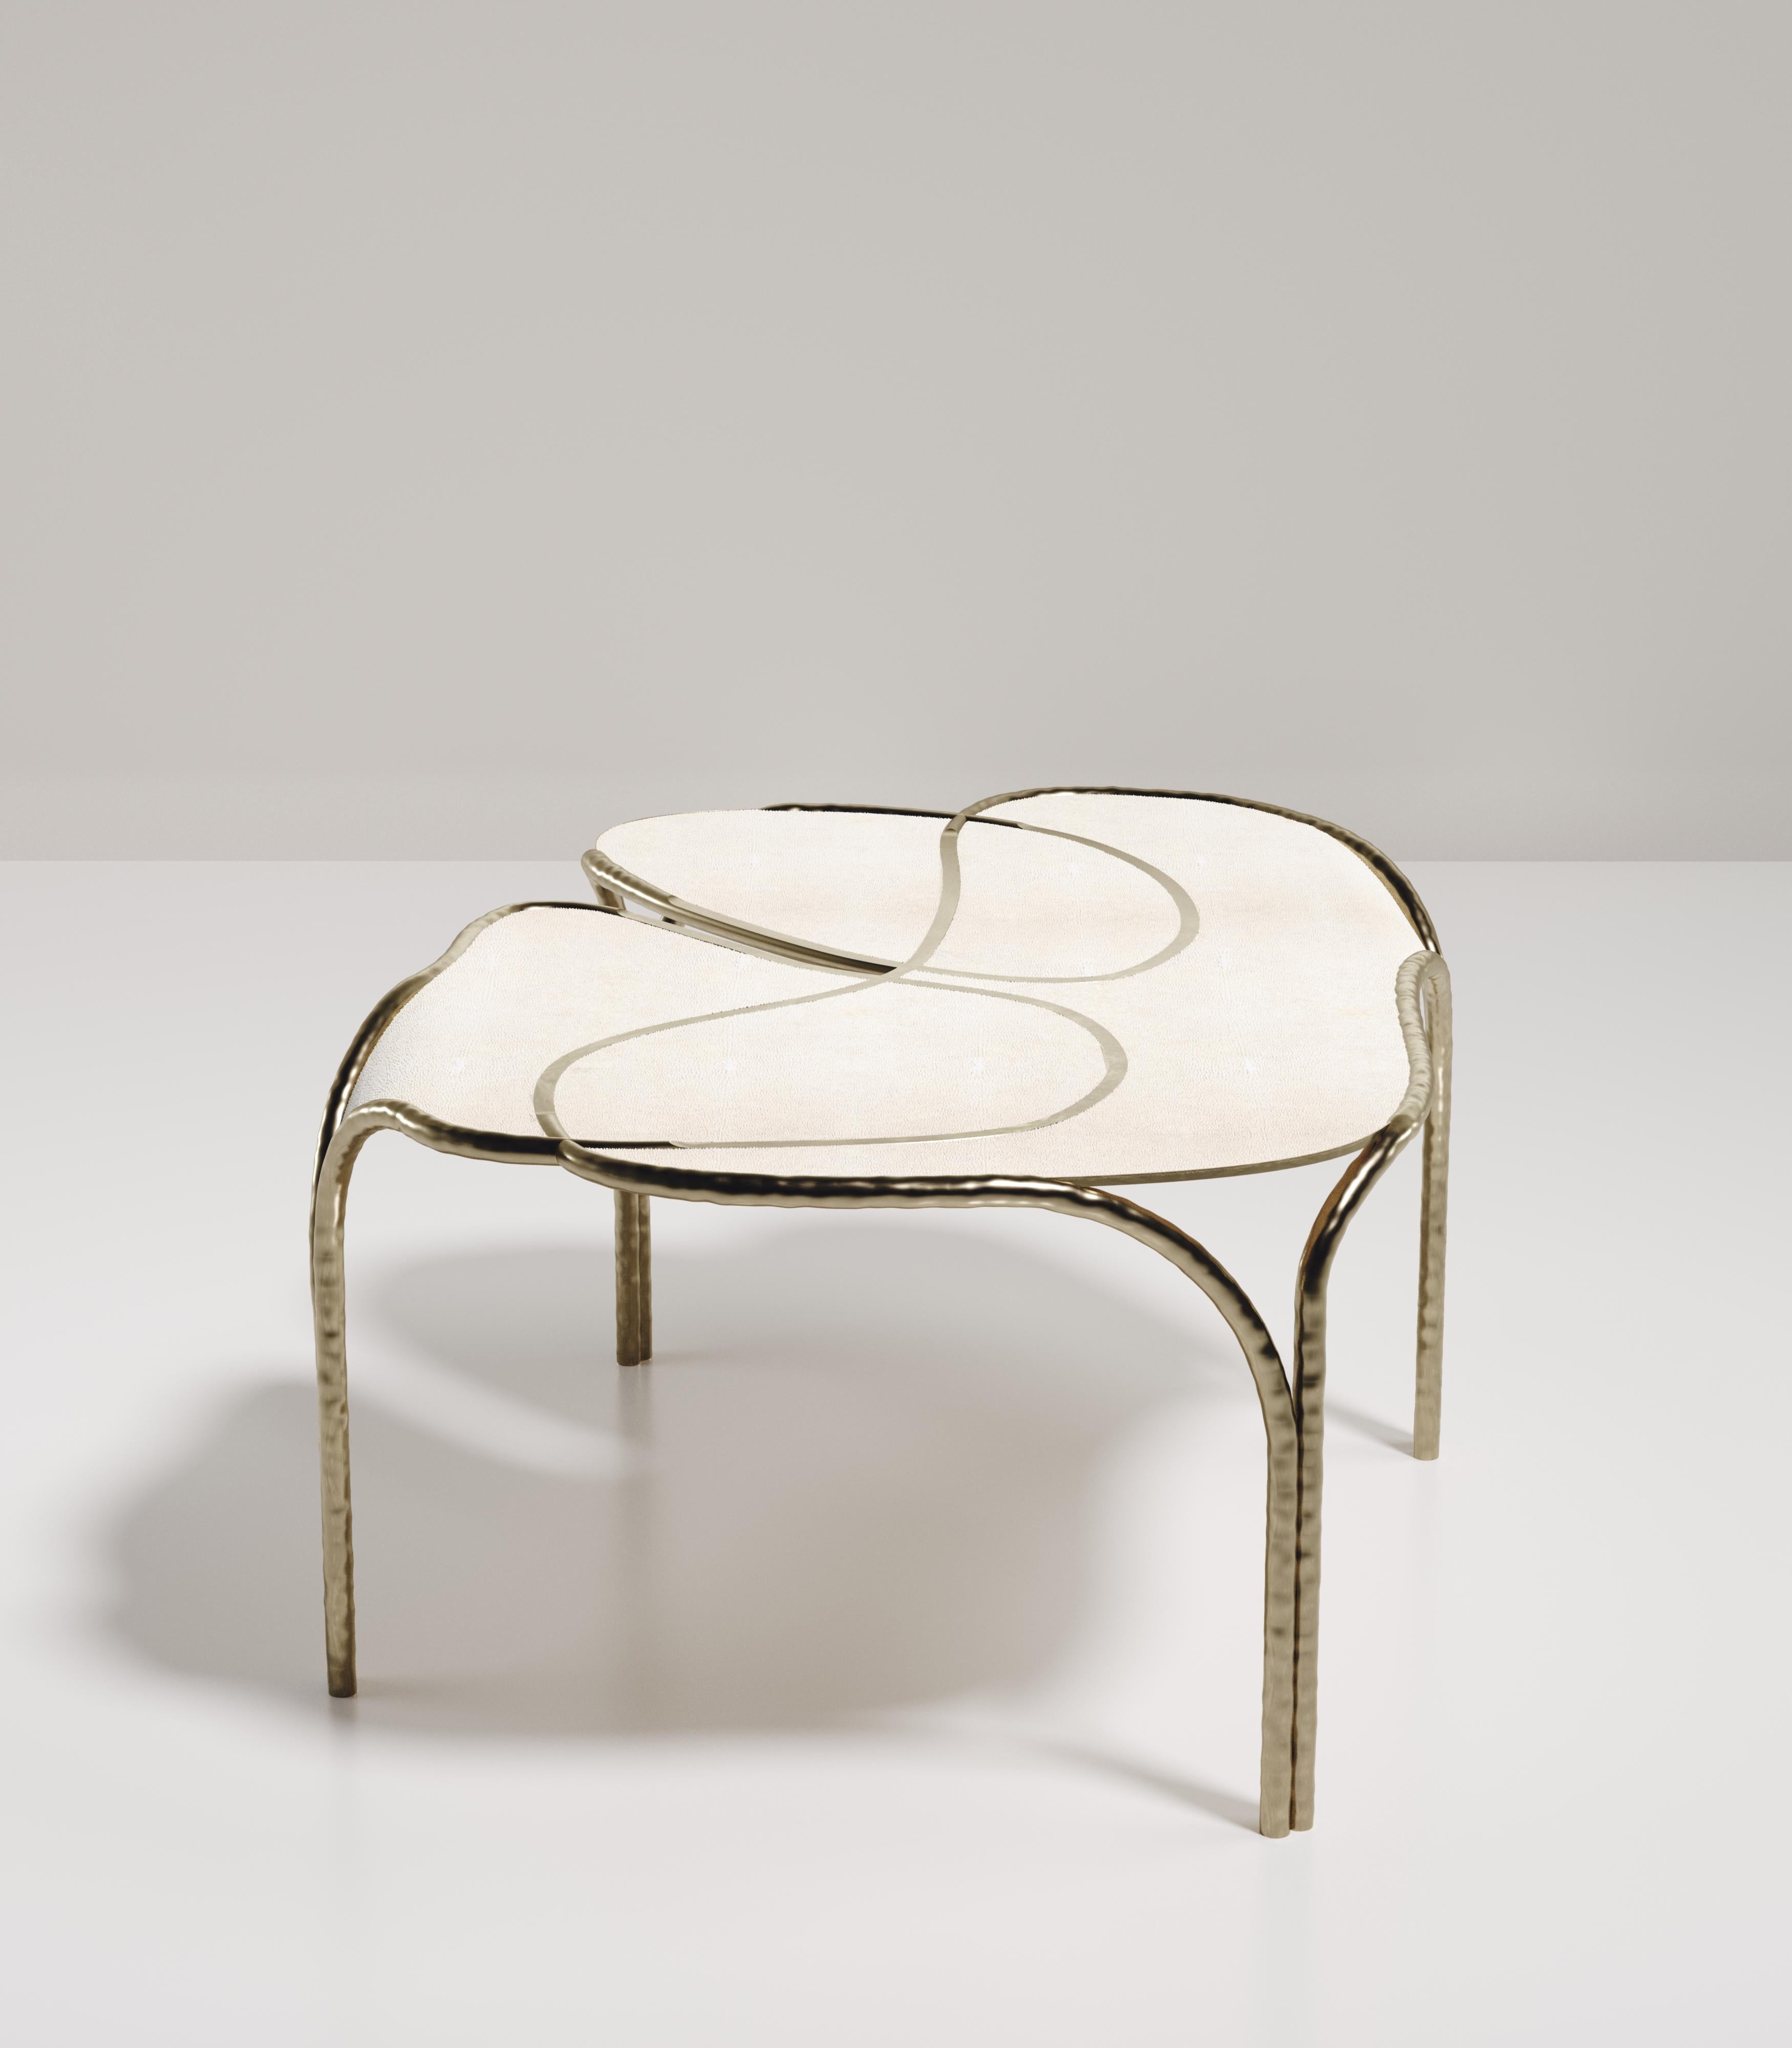 The Arianne Coffee Table by R&Y Augousti is one of a kind statement and whimsical piece. The overall piece is inlaid in cream shagreen accentuated with intricate bronze-patina brass details that have the signature Augousti 